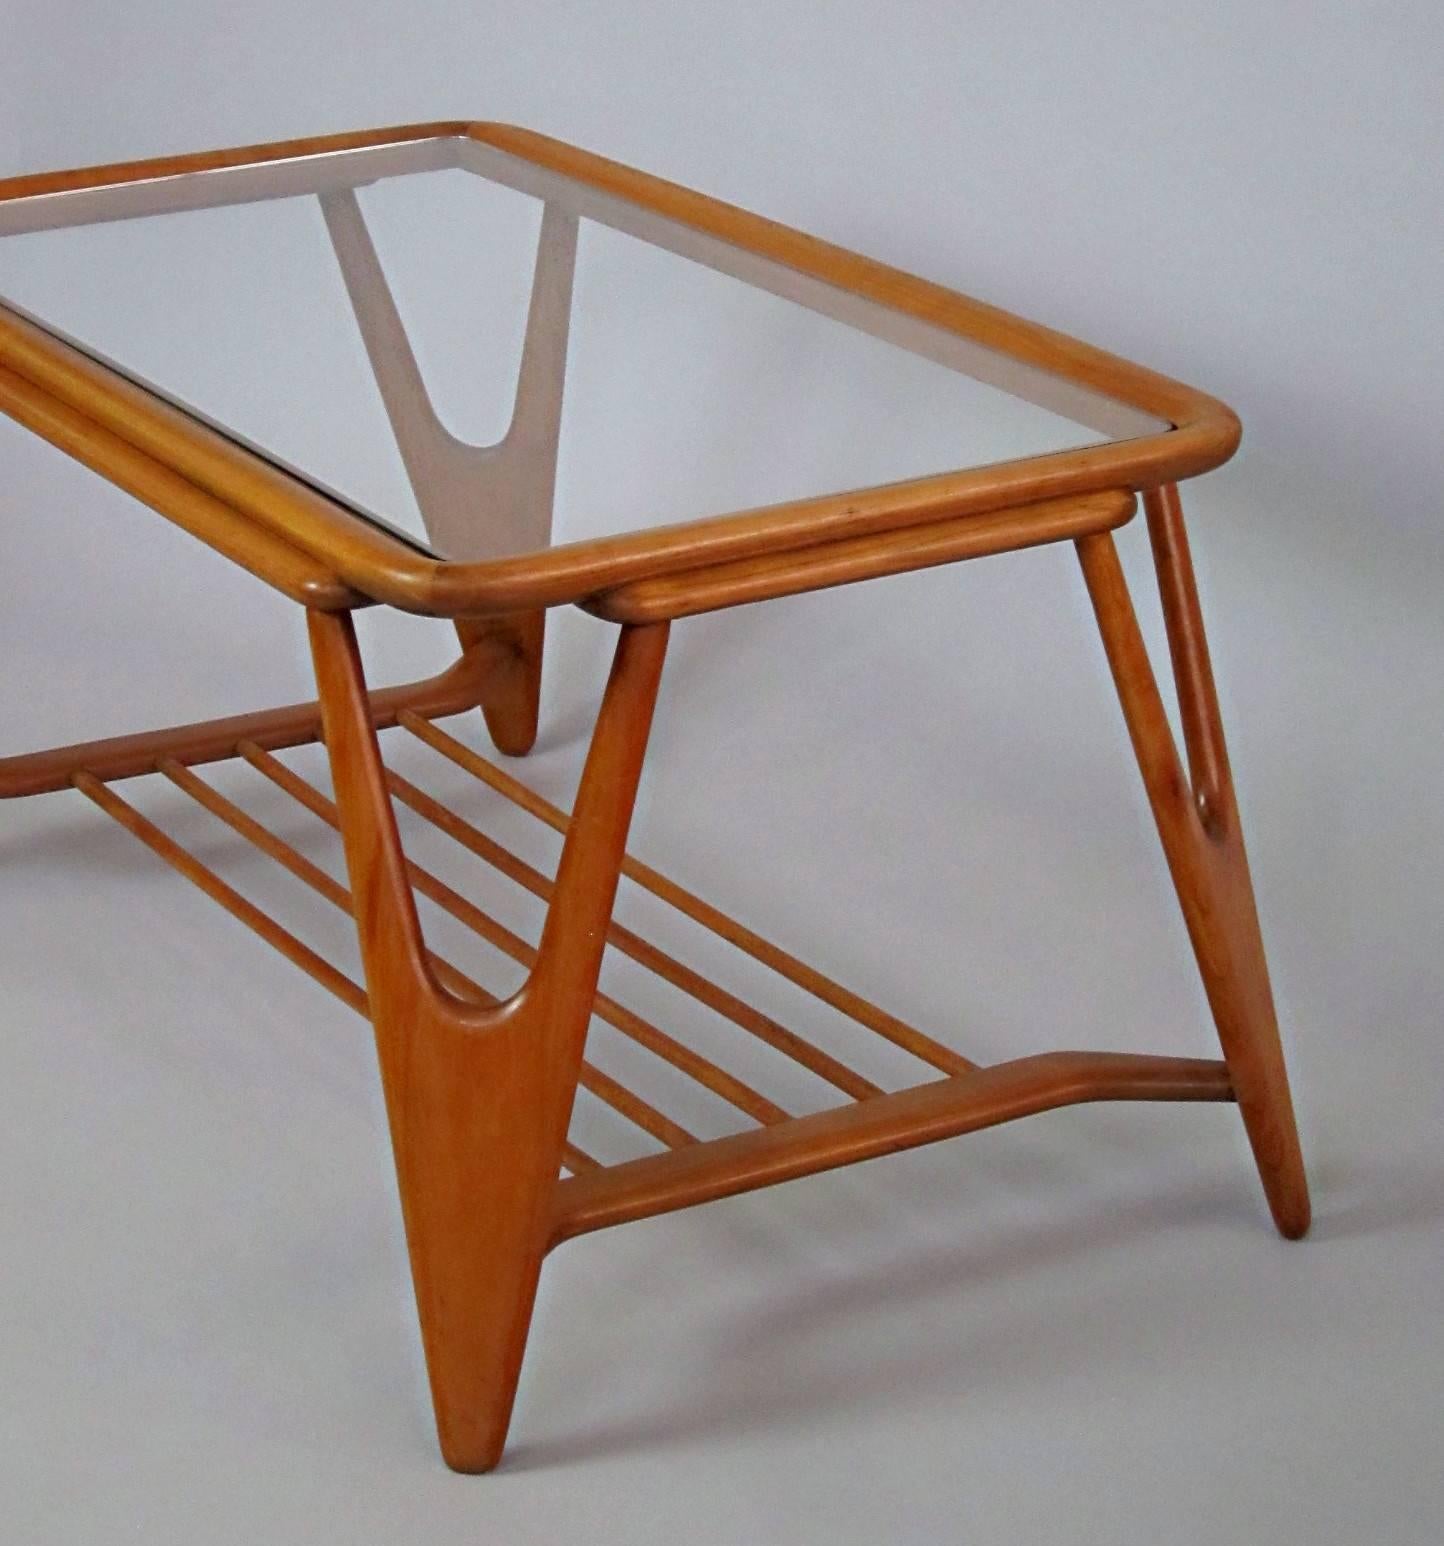 Italian Exceptional Organic Coffeetable, Italy, 1950s For Sale